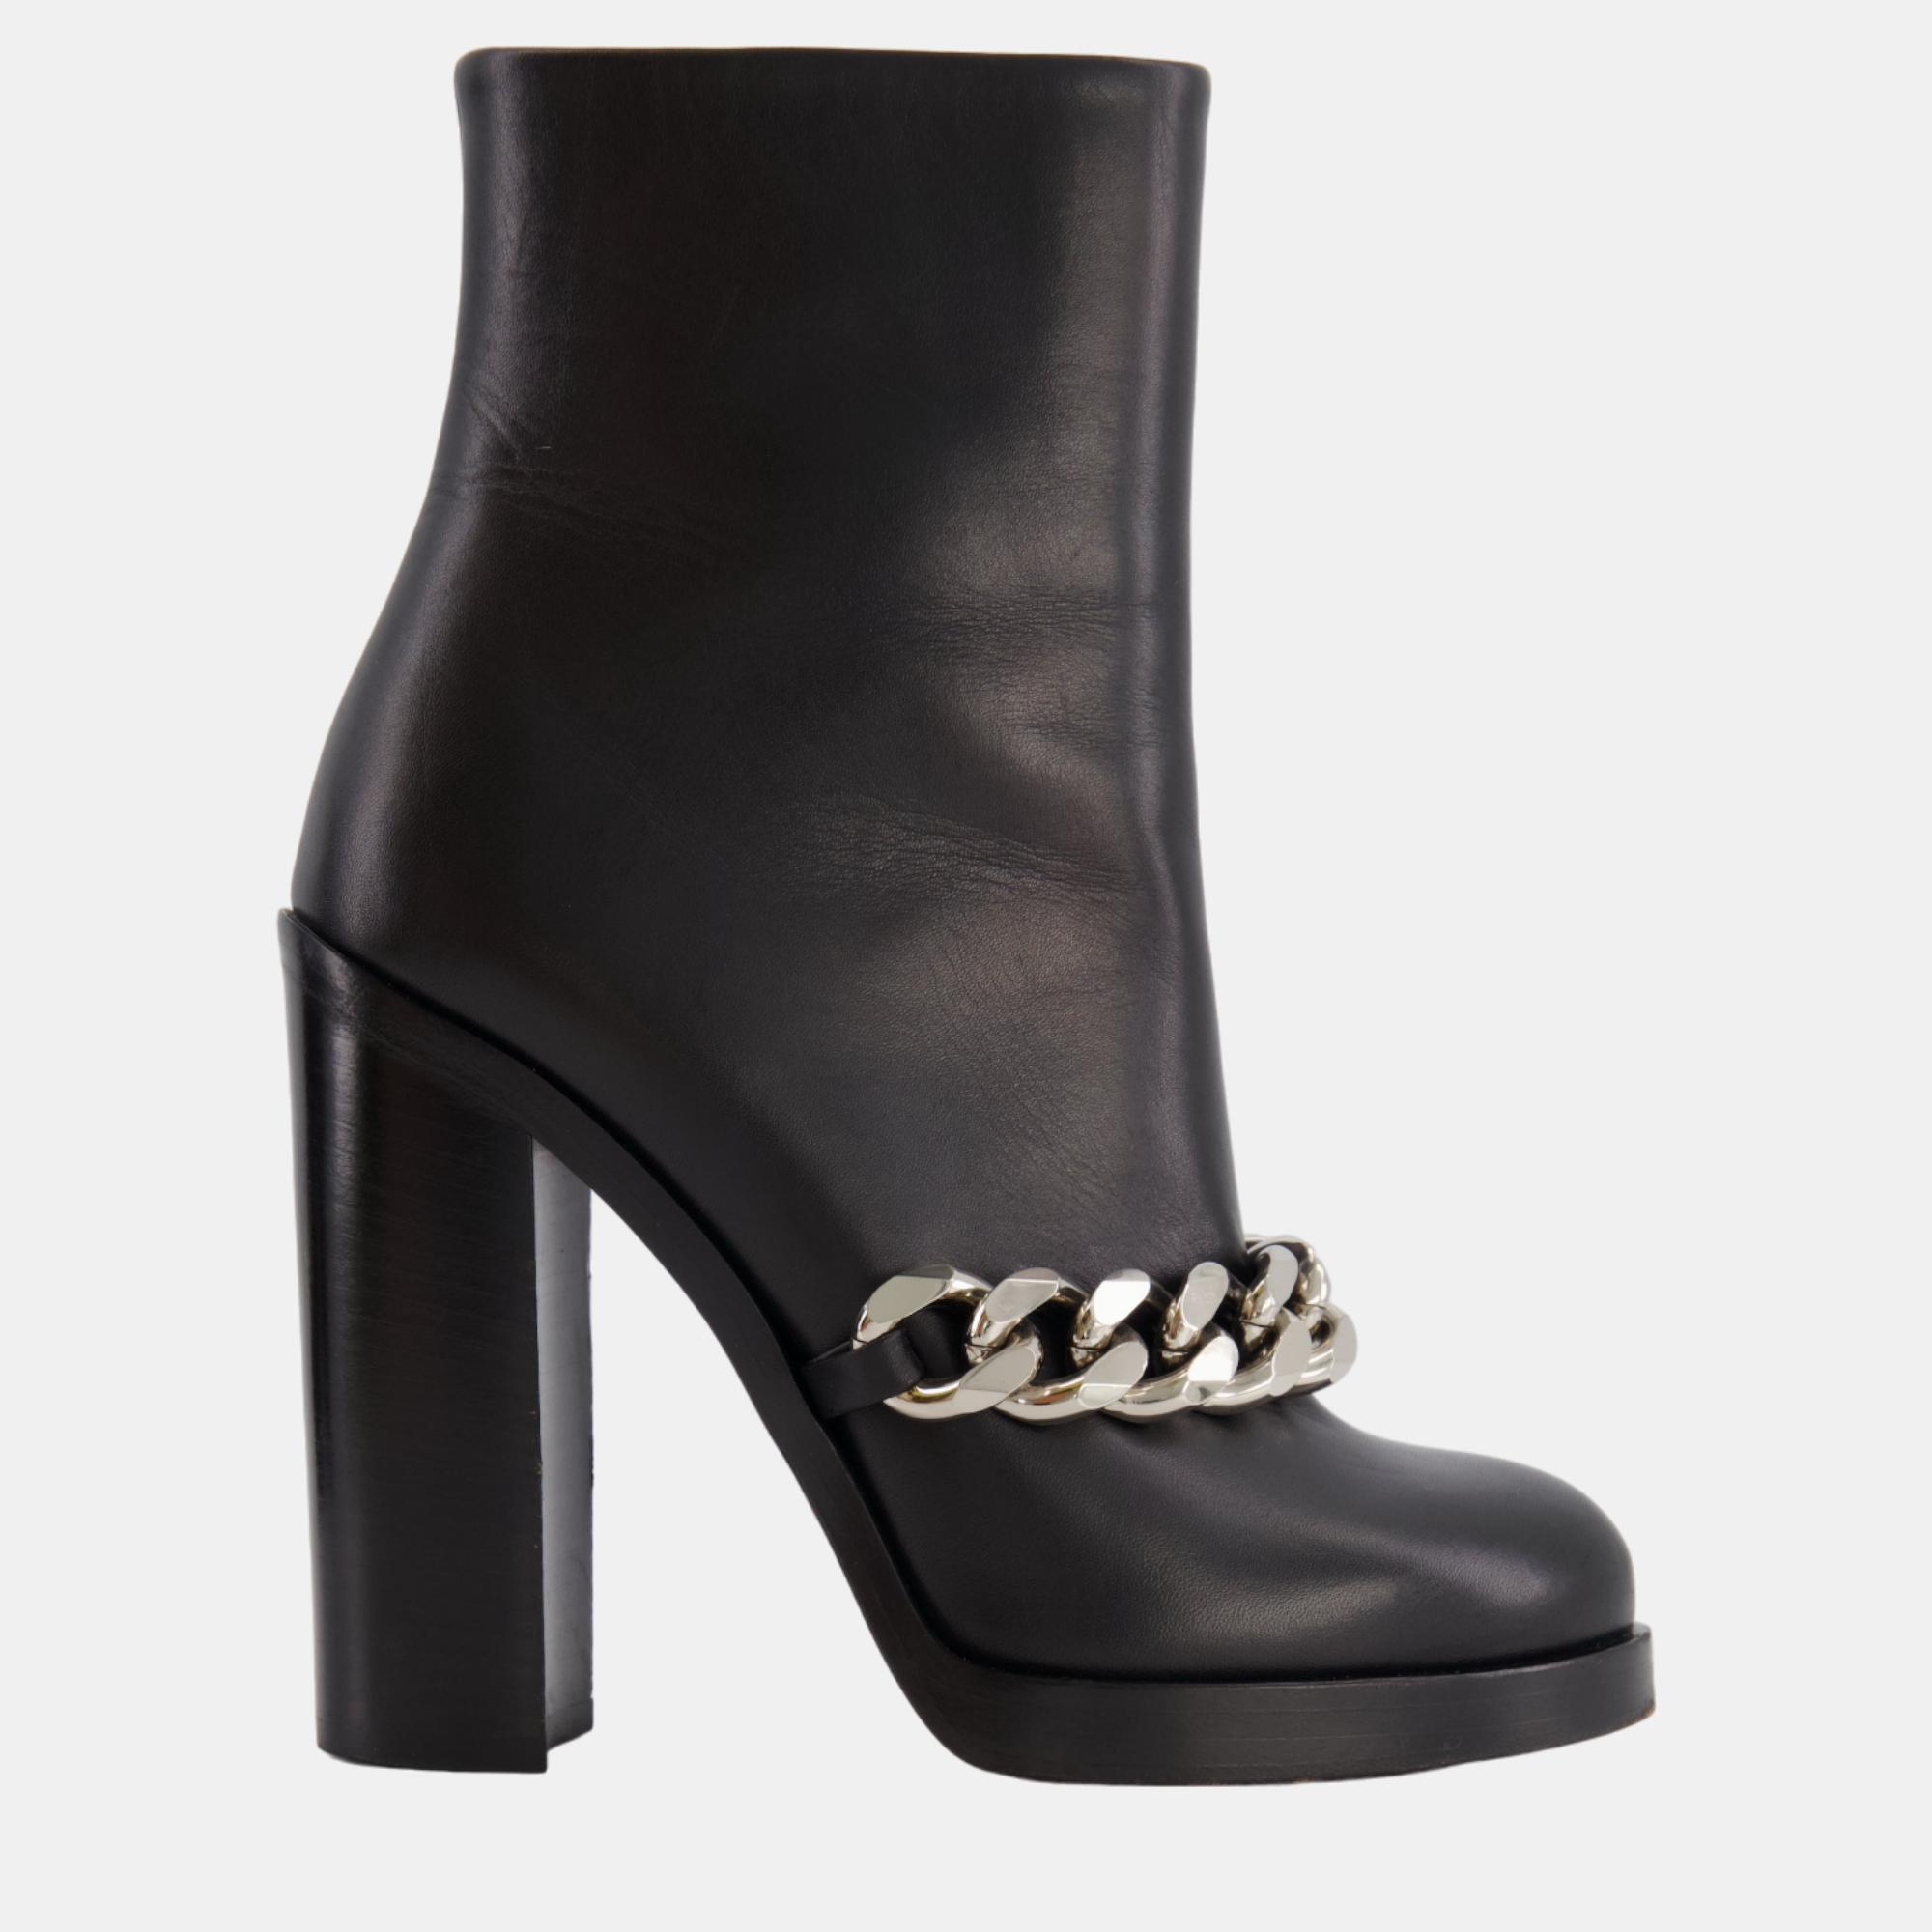 Givenchy black leather heeled boots with silver chain detail size eu 36.5